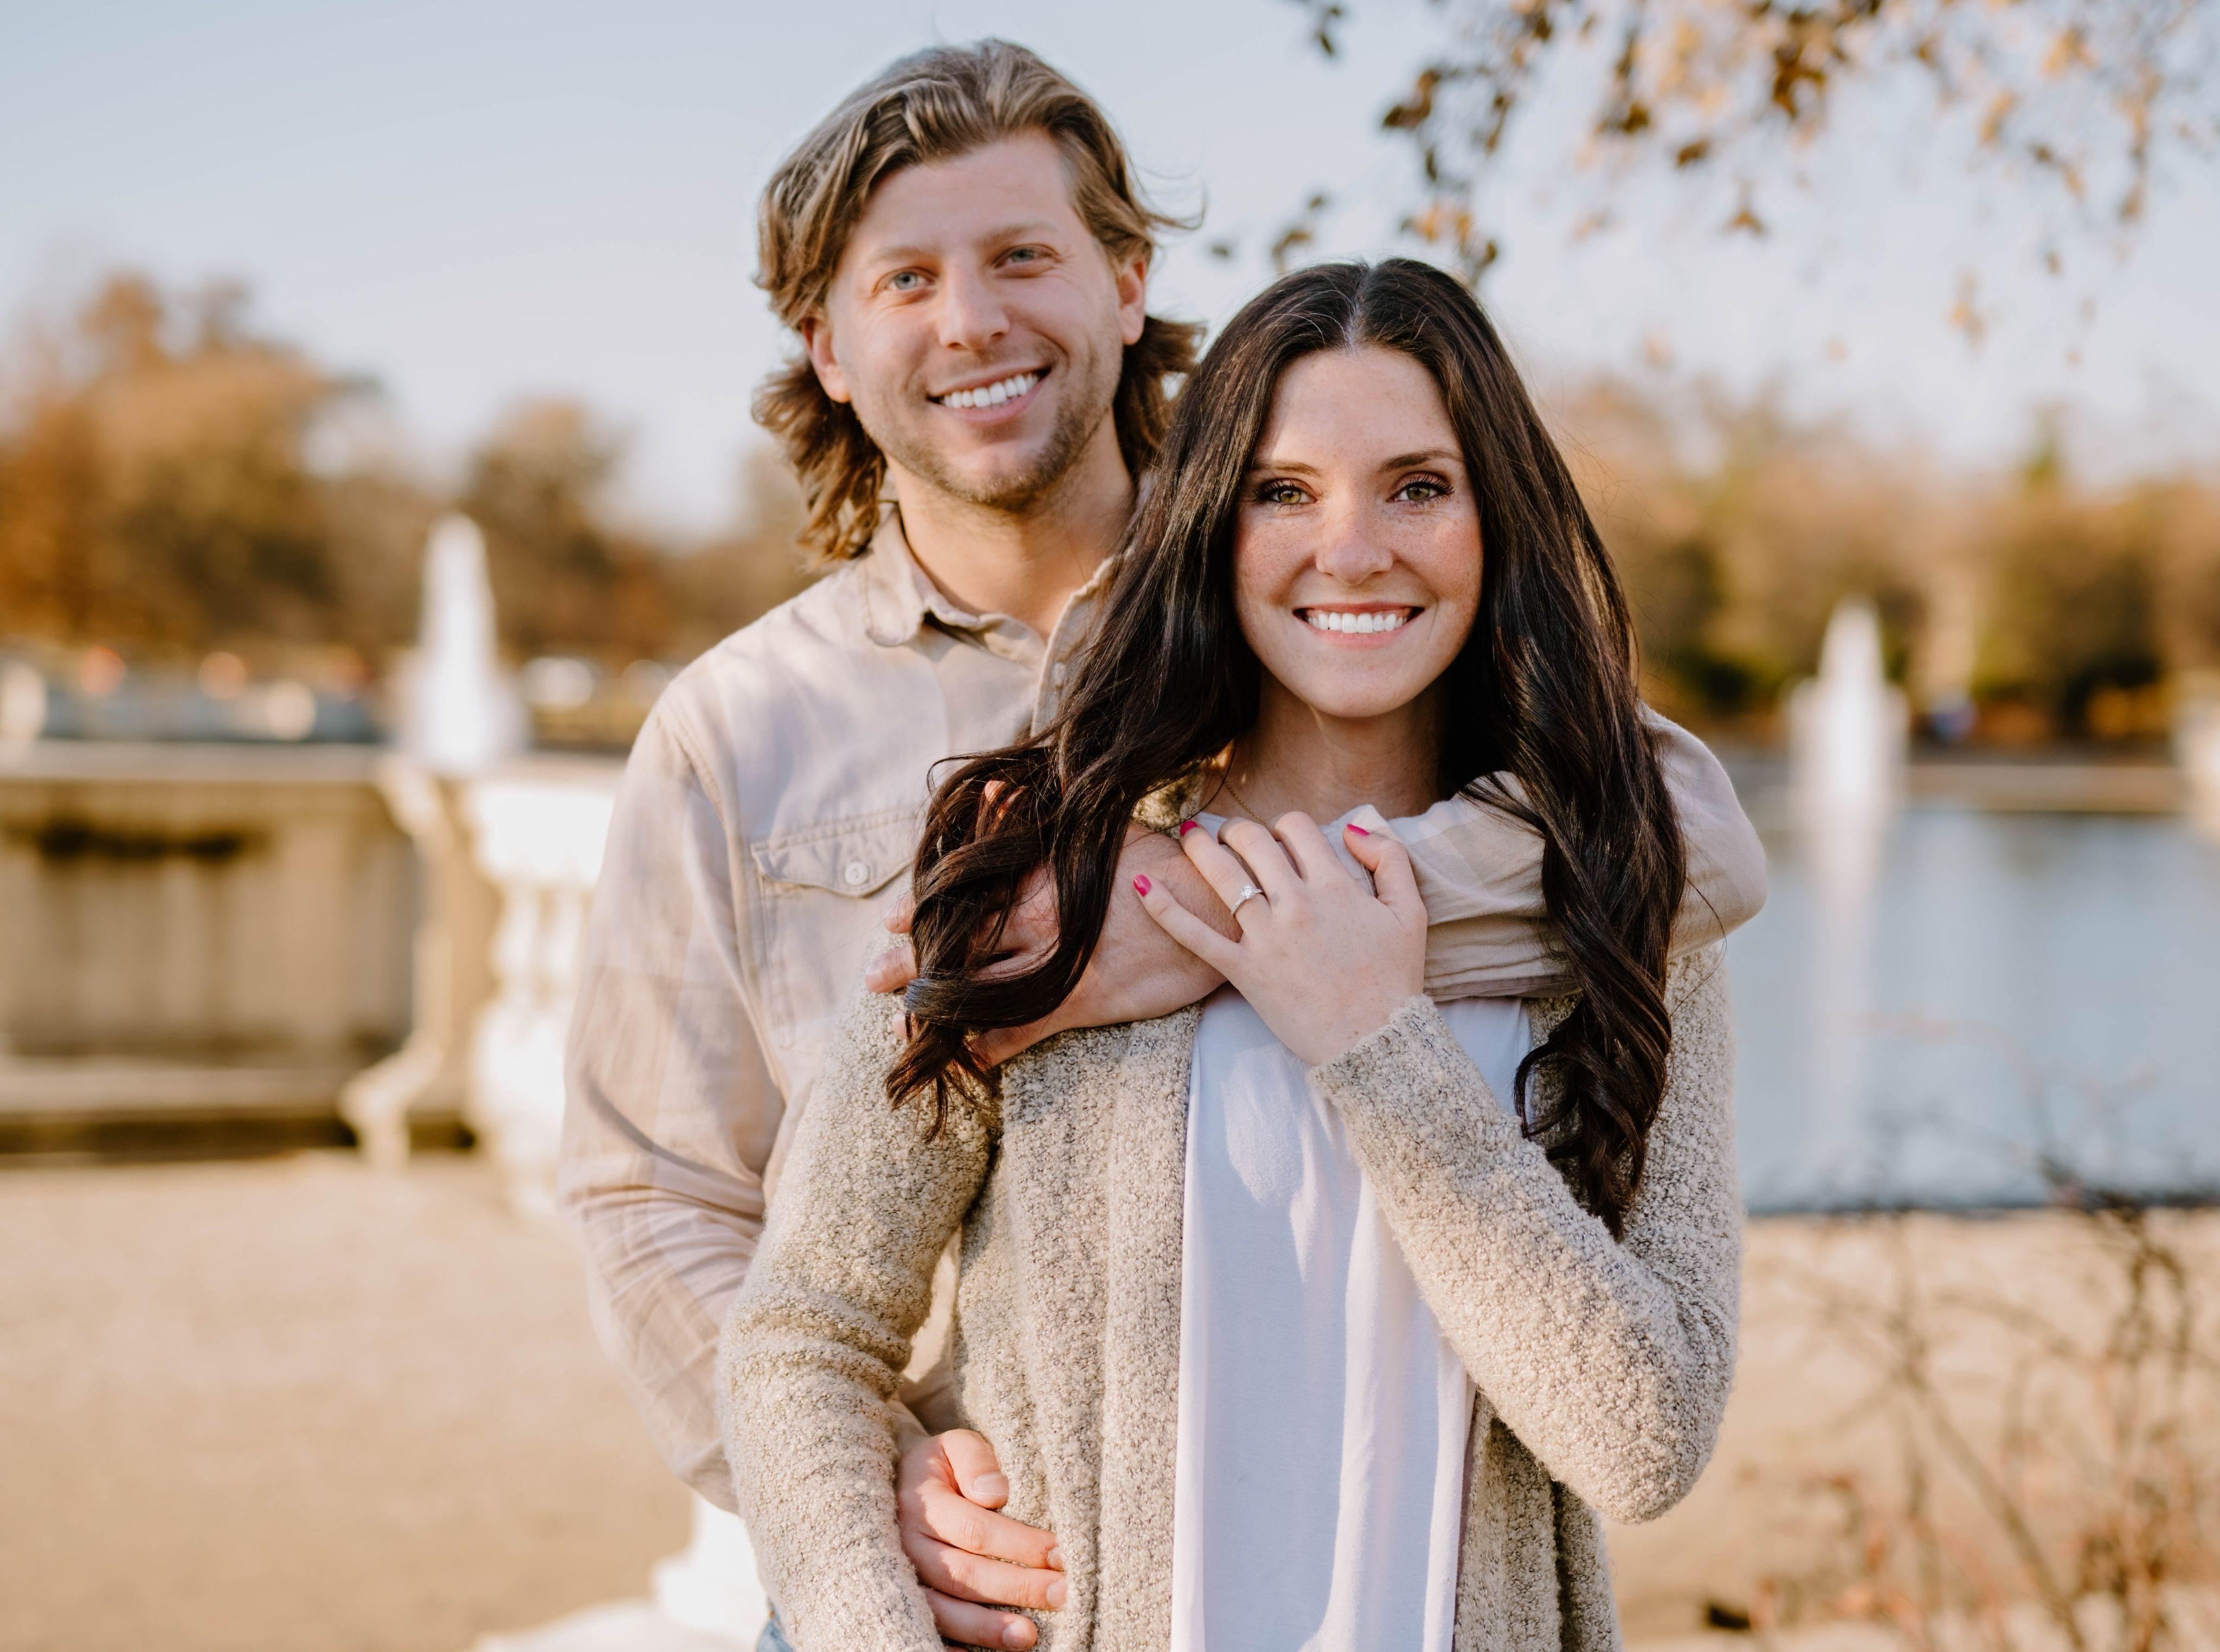 The Wedding Website of Lindsey Peck and Jared Lescavage